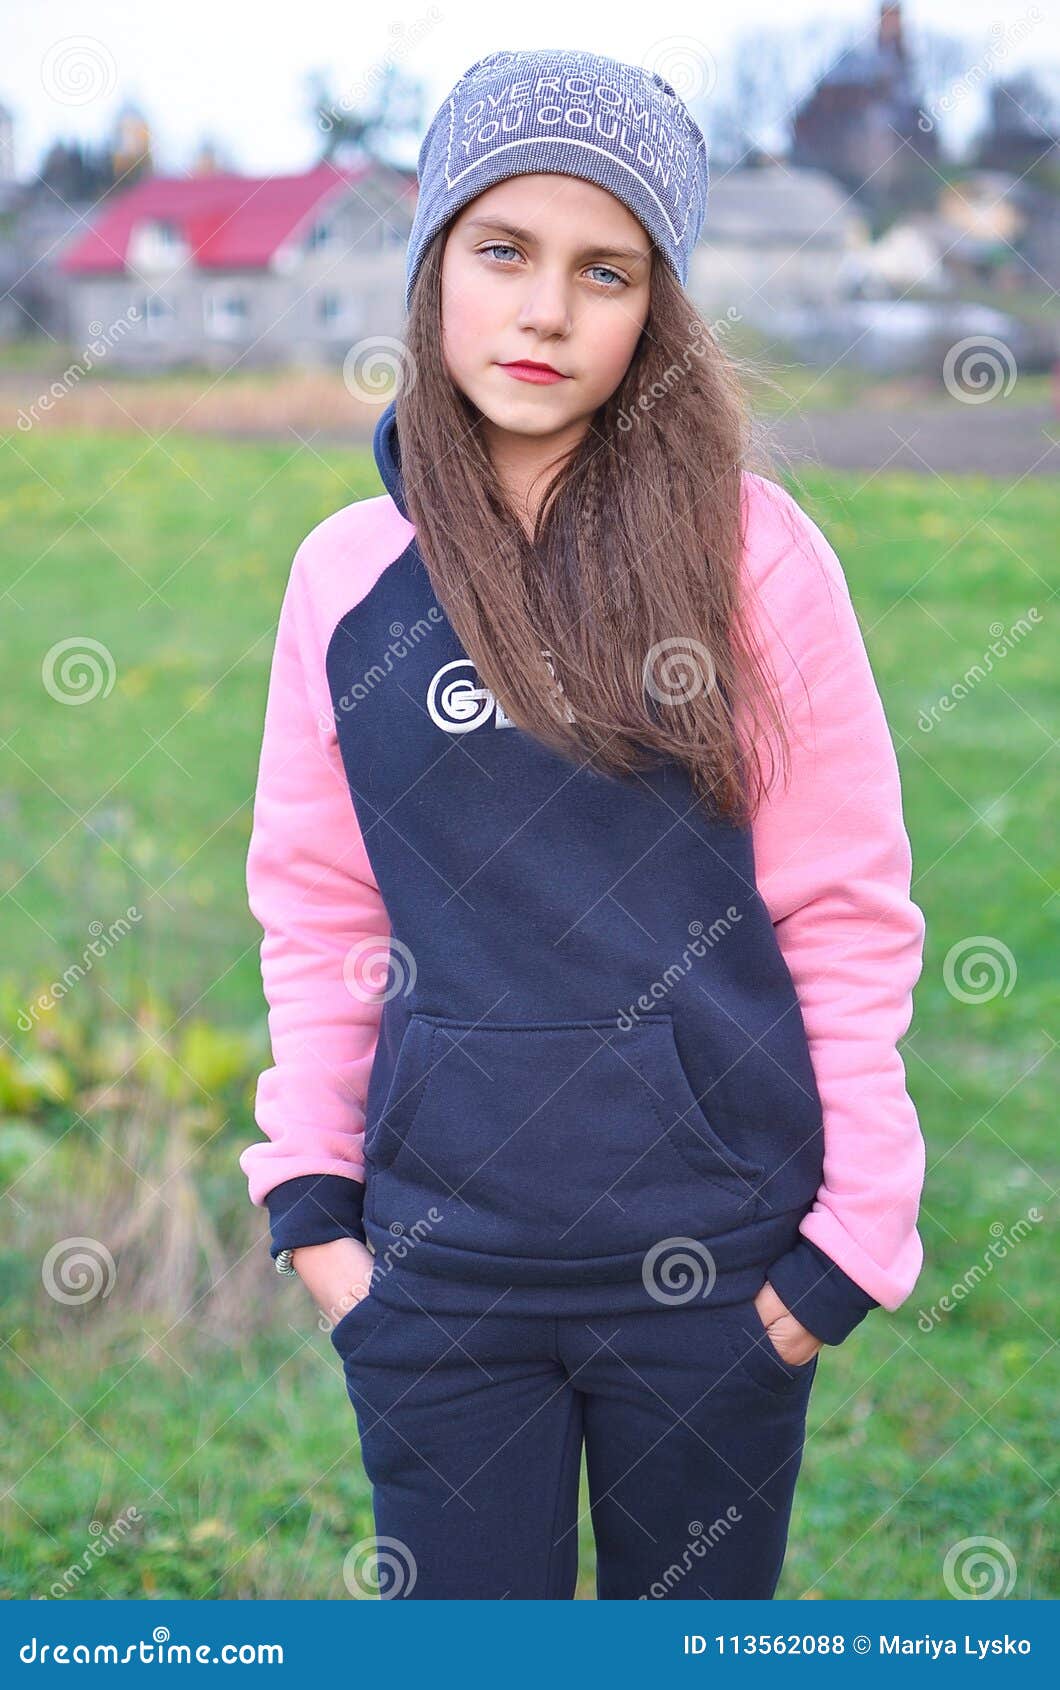 A Girl in Adolescence Stock Photo - Image beautiful, choice: 113562088